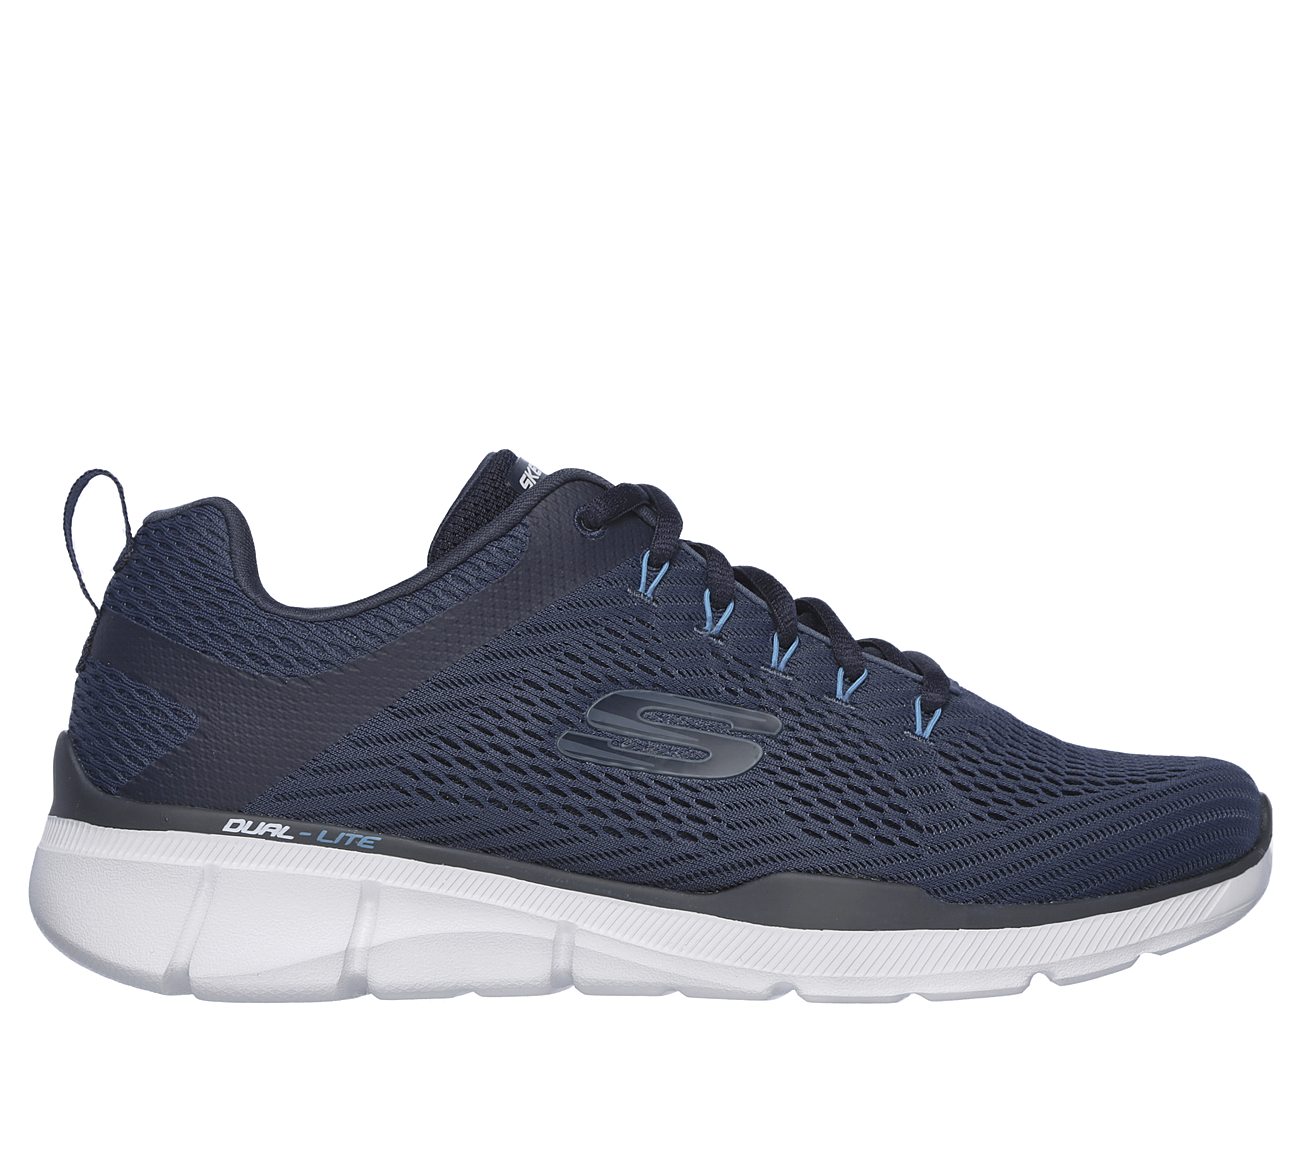 Buy SKECHERS Relaxed Fit: Equalizer 3.0 SKECHERS Sport Shoes